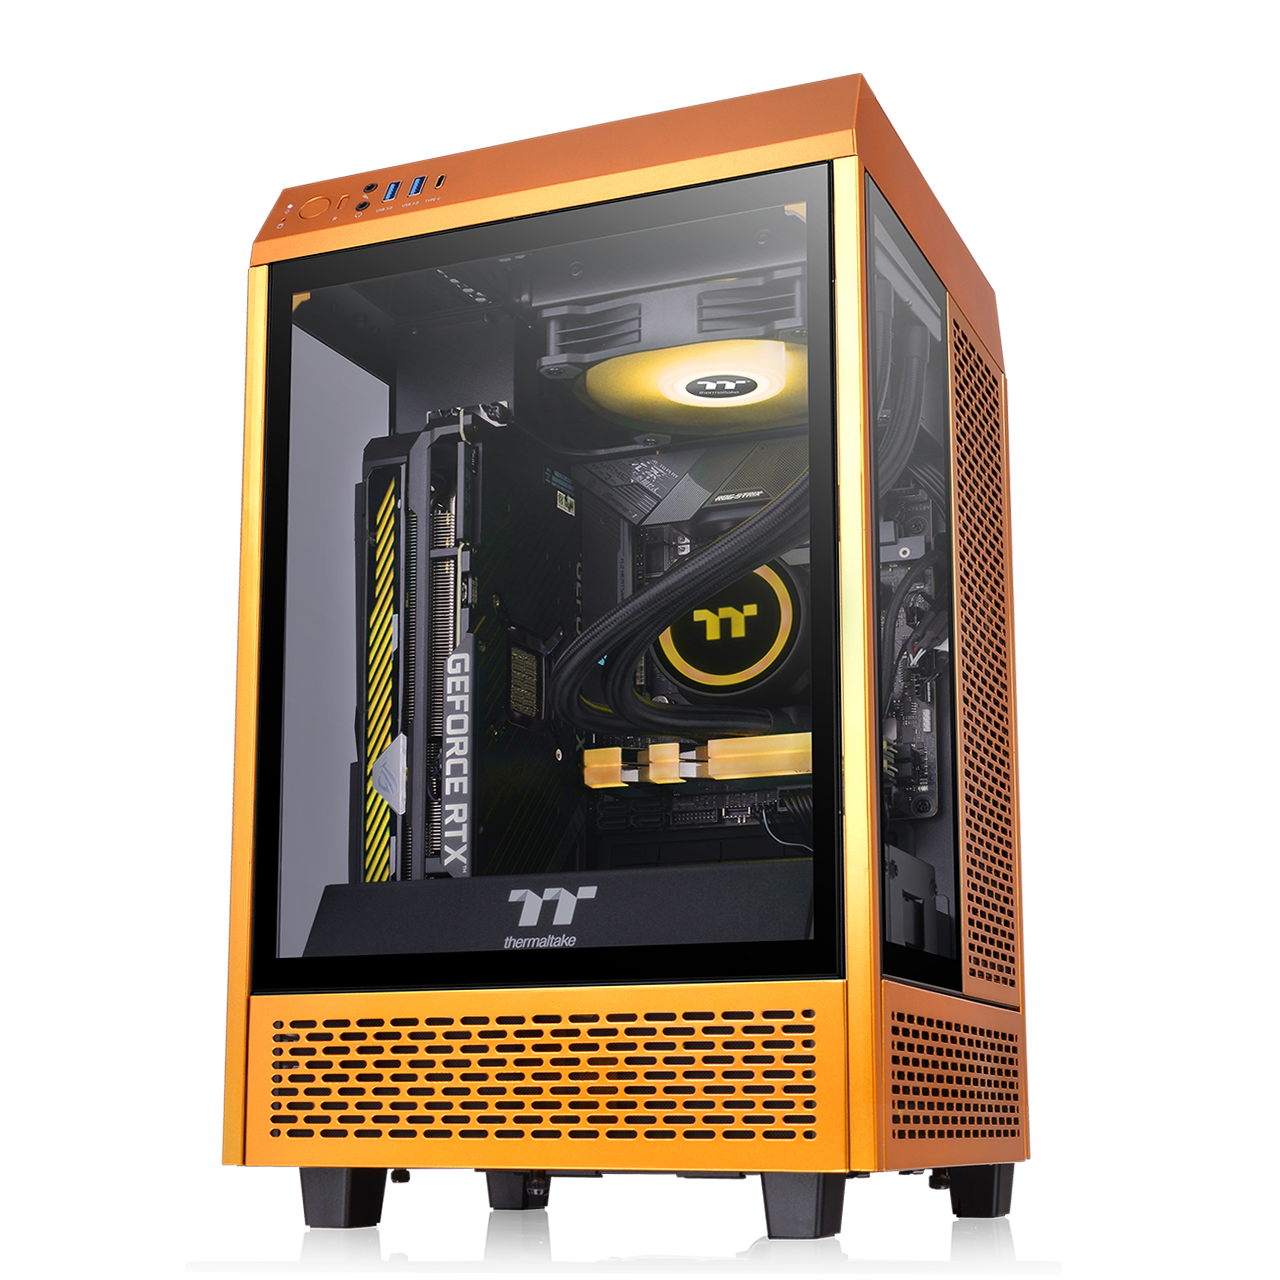 Thermaltake gold. Thermaltake the Tower 100. Thermaltake the Tower 100 Mini. Thermaltake the Tower 100 Gold. Корпус Thermaltake the Tower 100.